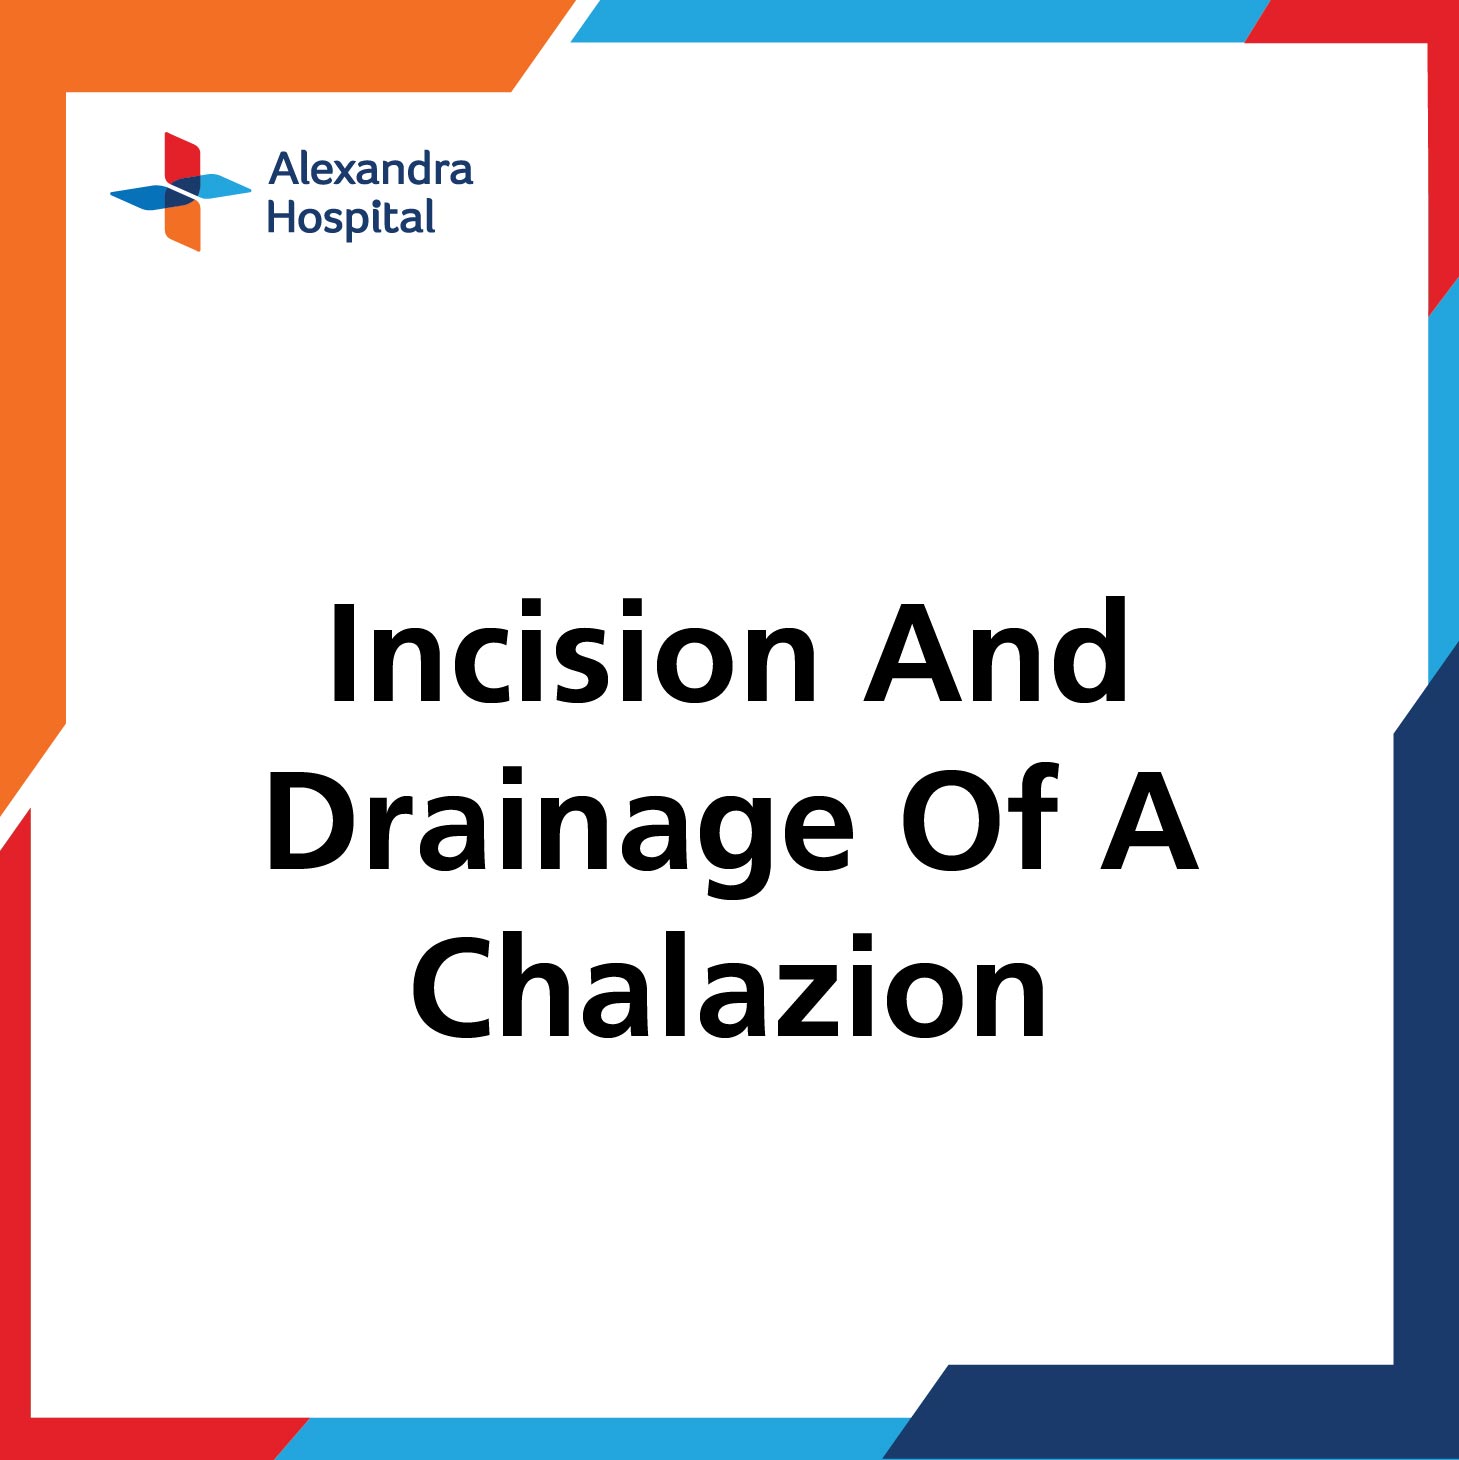 Incision And Drainage Of A Chalazion